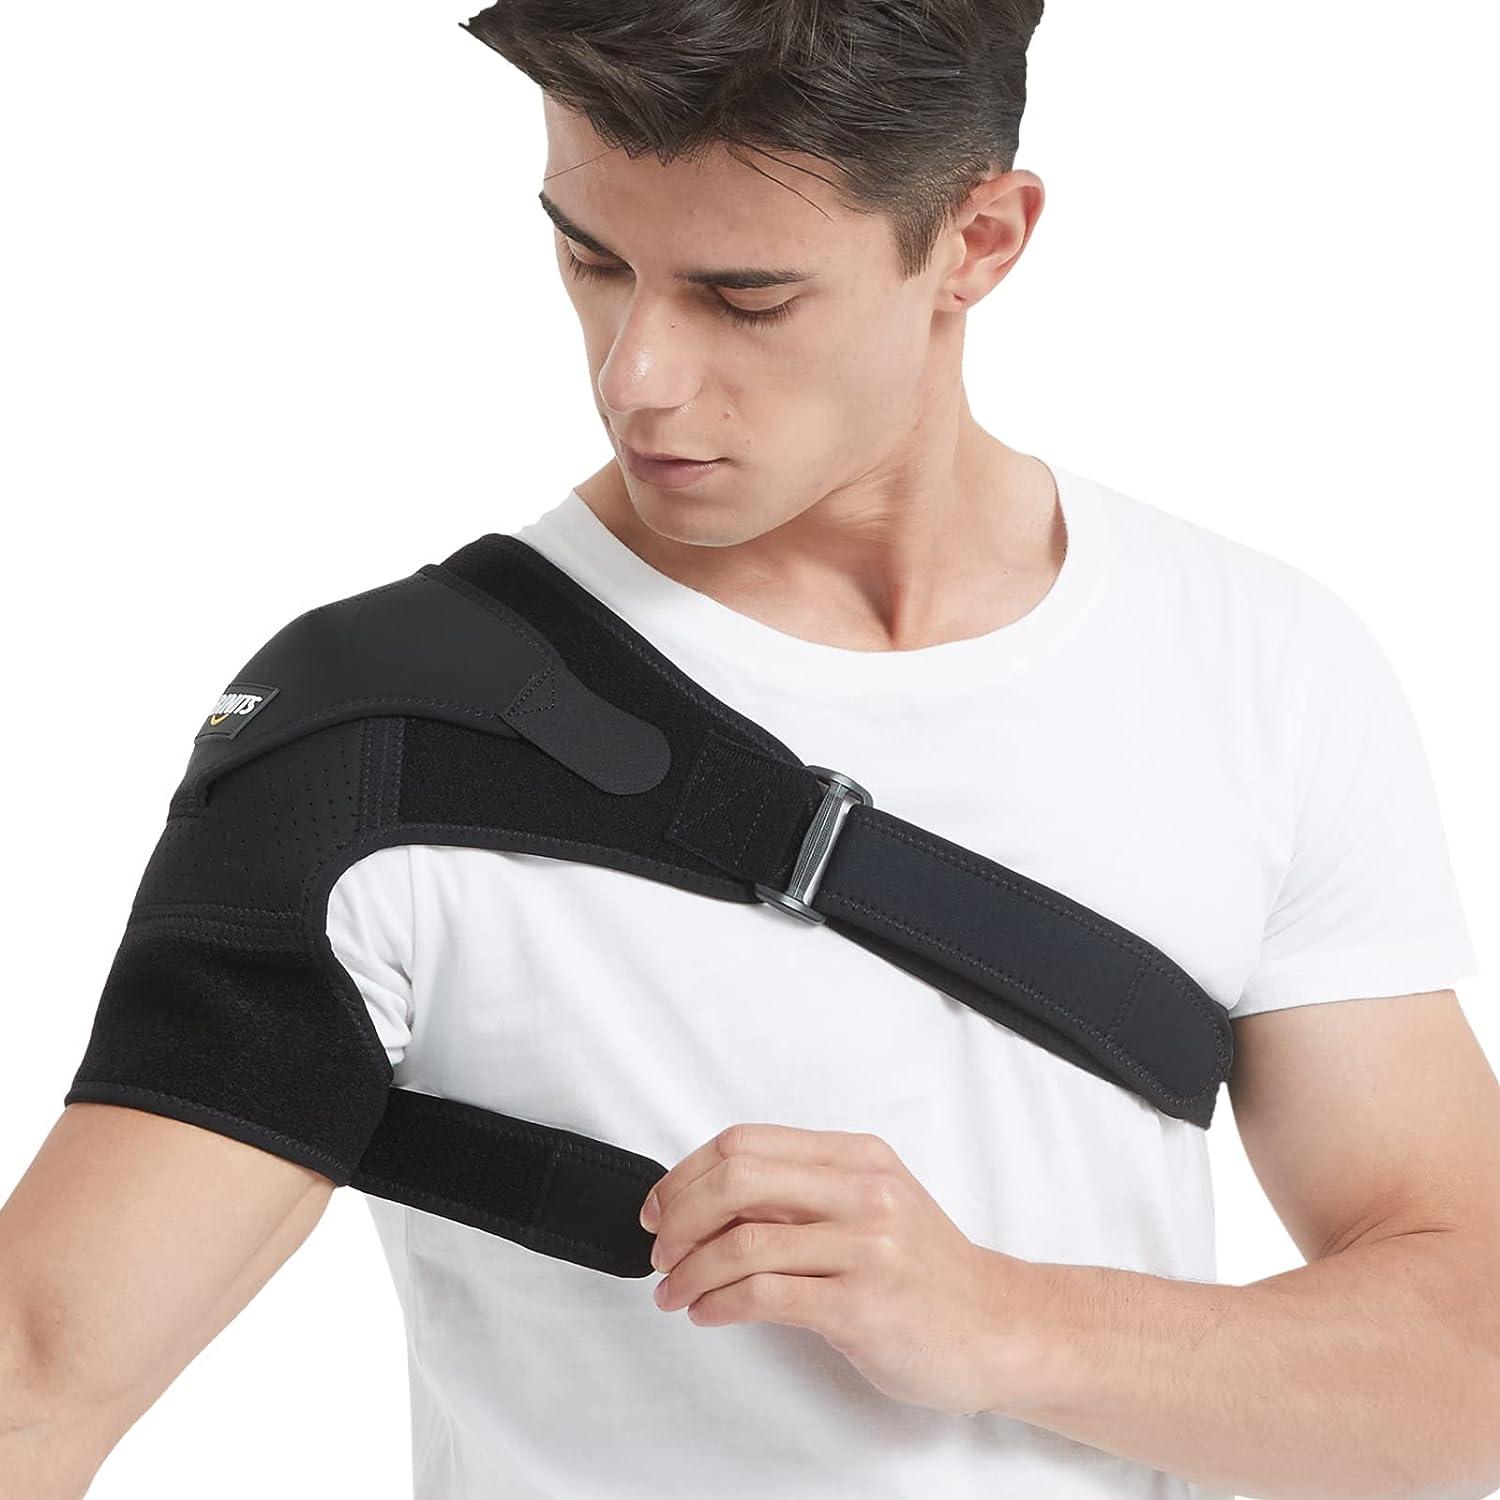 Care Shoulder Stability Brace with Pressure Pad Light and Breathable  Neoprene Shoulder Support for Rotator Cuff, Dislocated AC Joint, Labrum  Tear, Shoulder Pain, Shoulder Compression Sleeve 